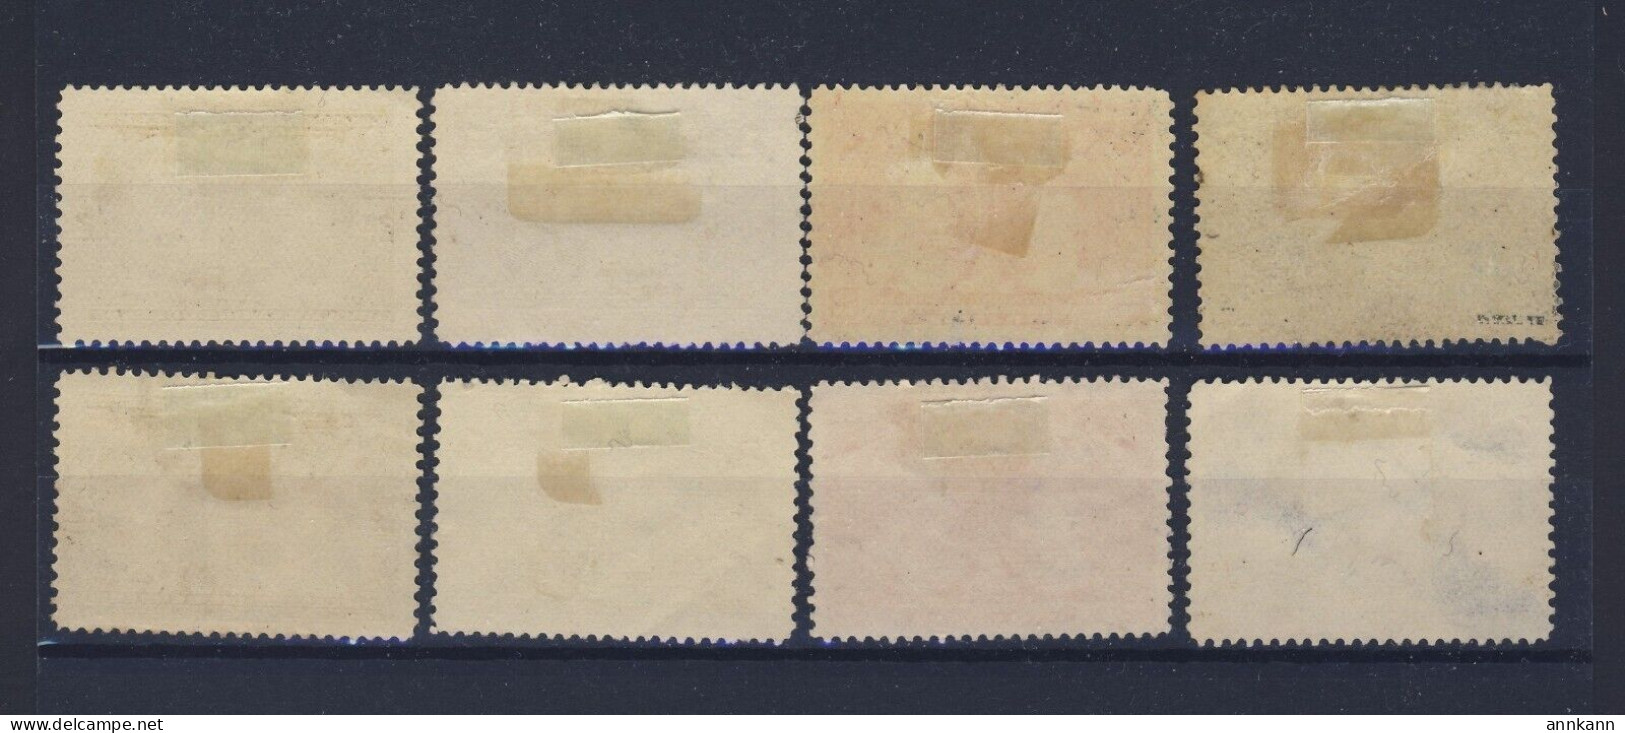 8x Canada 1908 Quebec Used & MNG Stamps 2 Each #96-97-98-99 Guide Value = $140.00 - Used Stamps